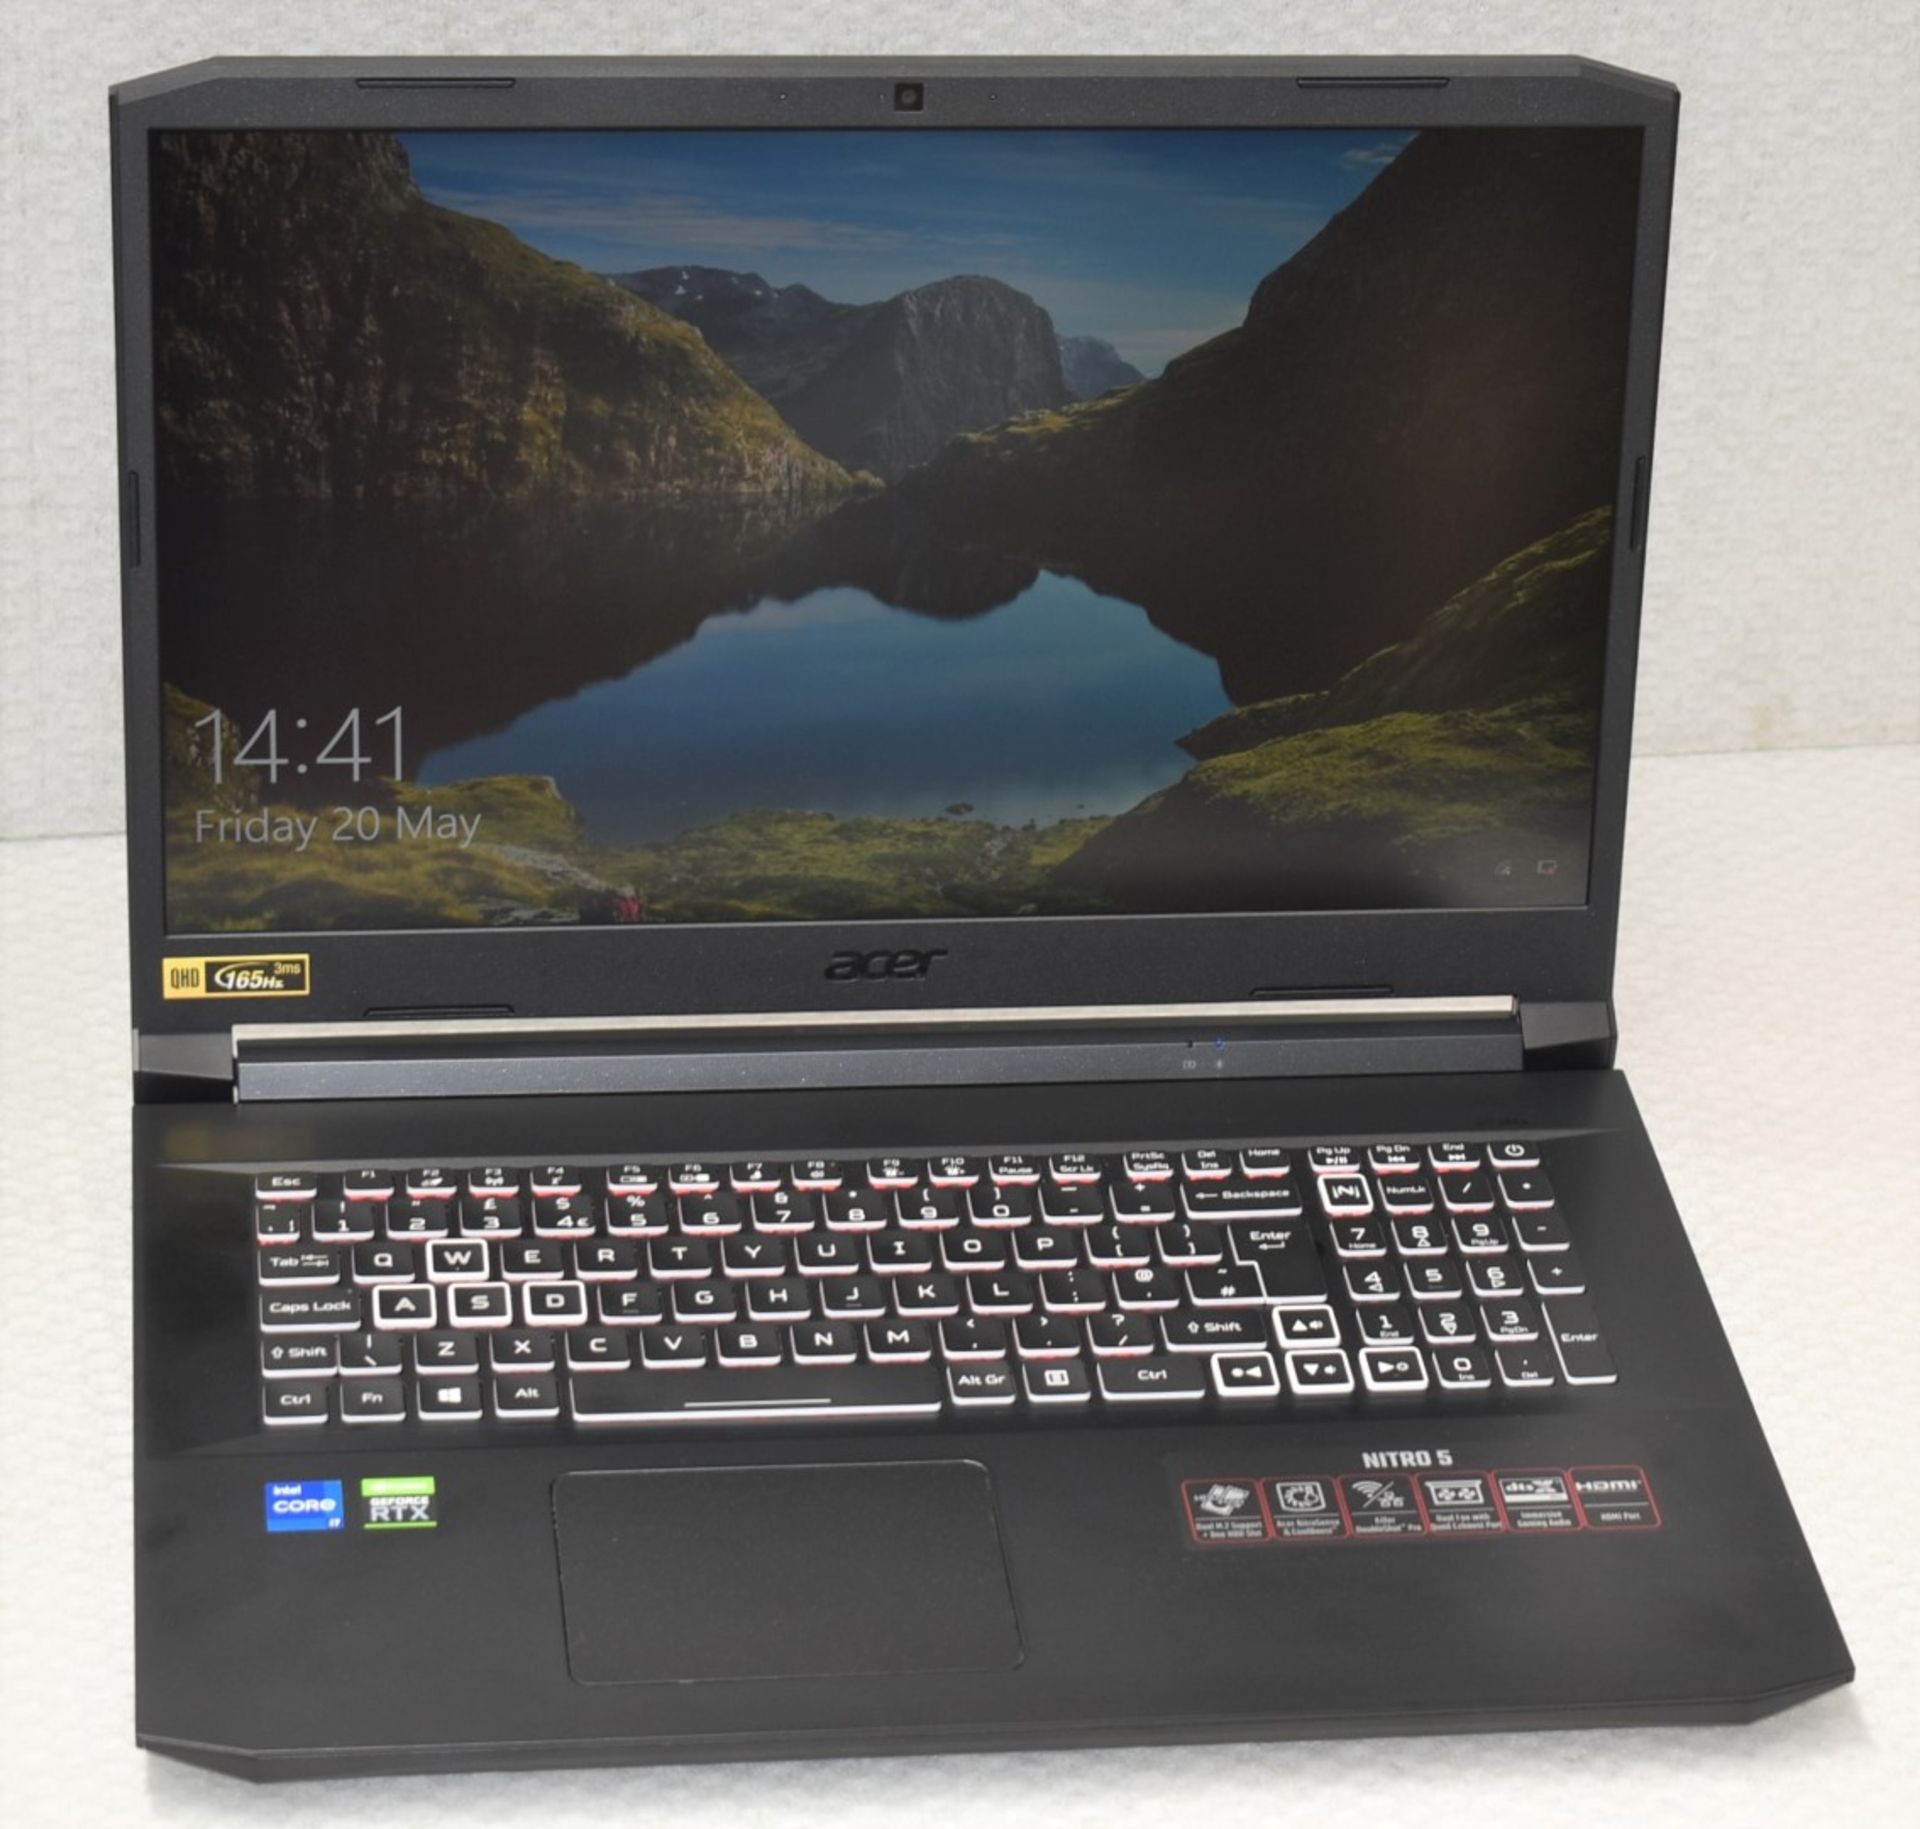 1 x Acer Nitro 5 17" Gaming Laptop - Features an Intel i7 11th Gen Processor & GTX3060 6gb Graphics